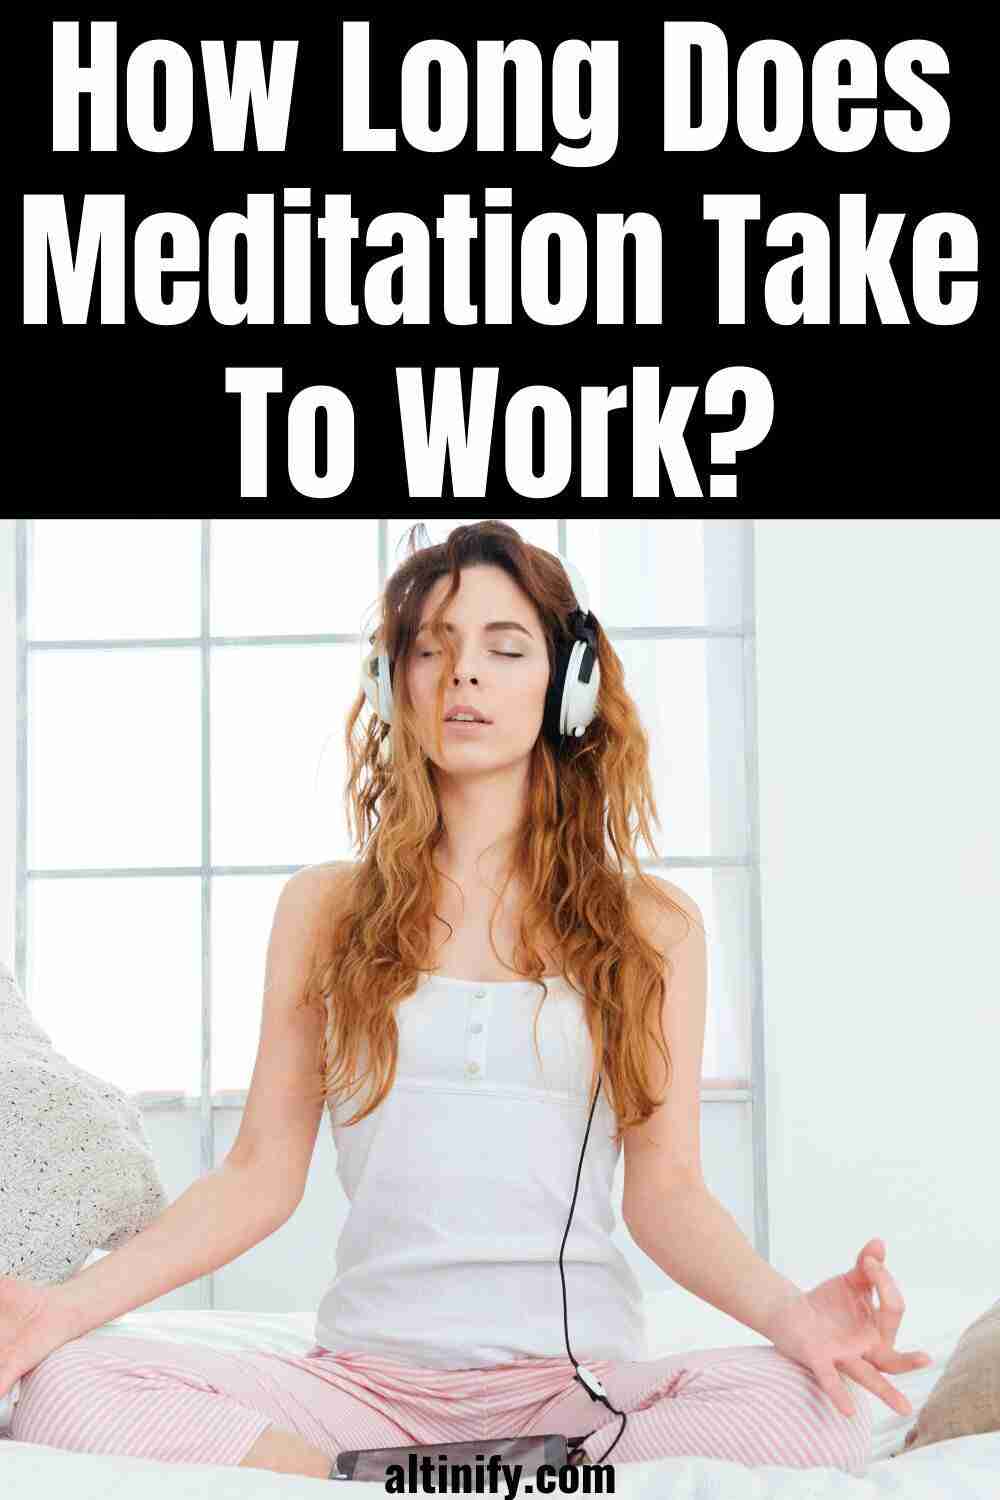 How Long Does Meditation Take To Work (This Long!)